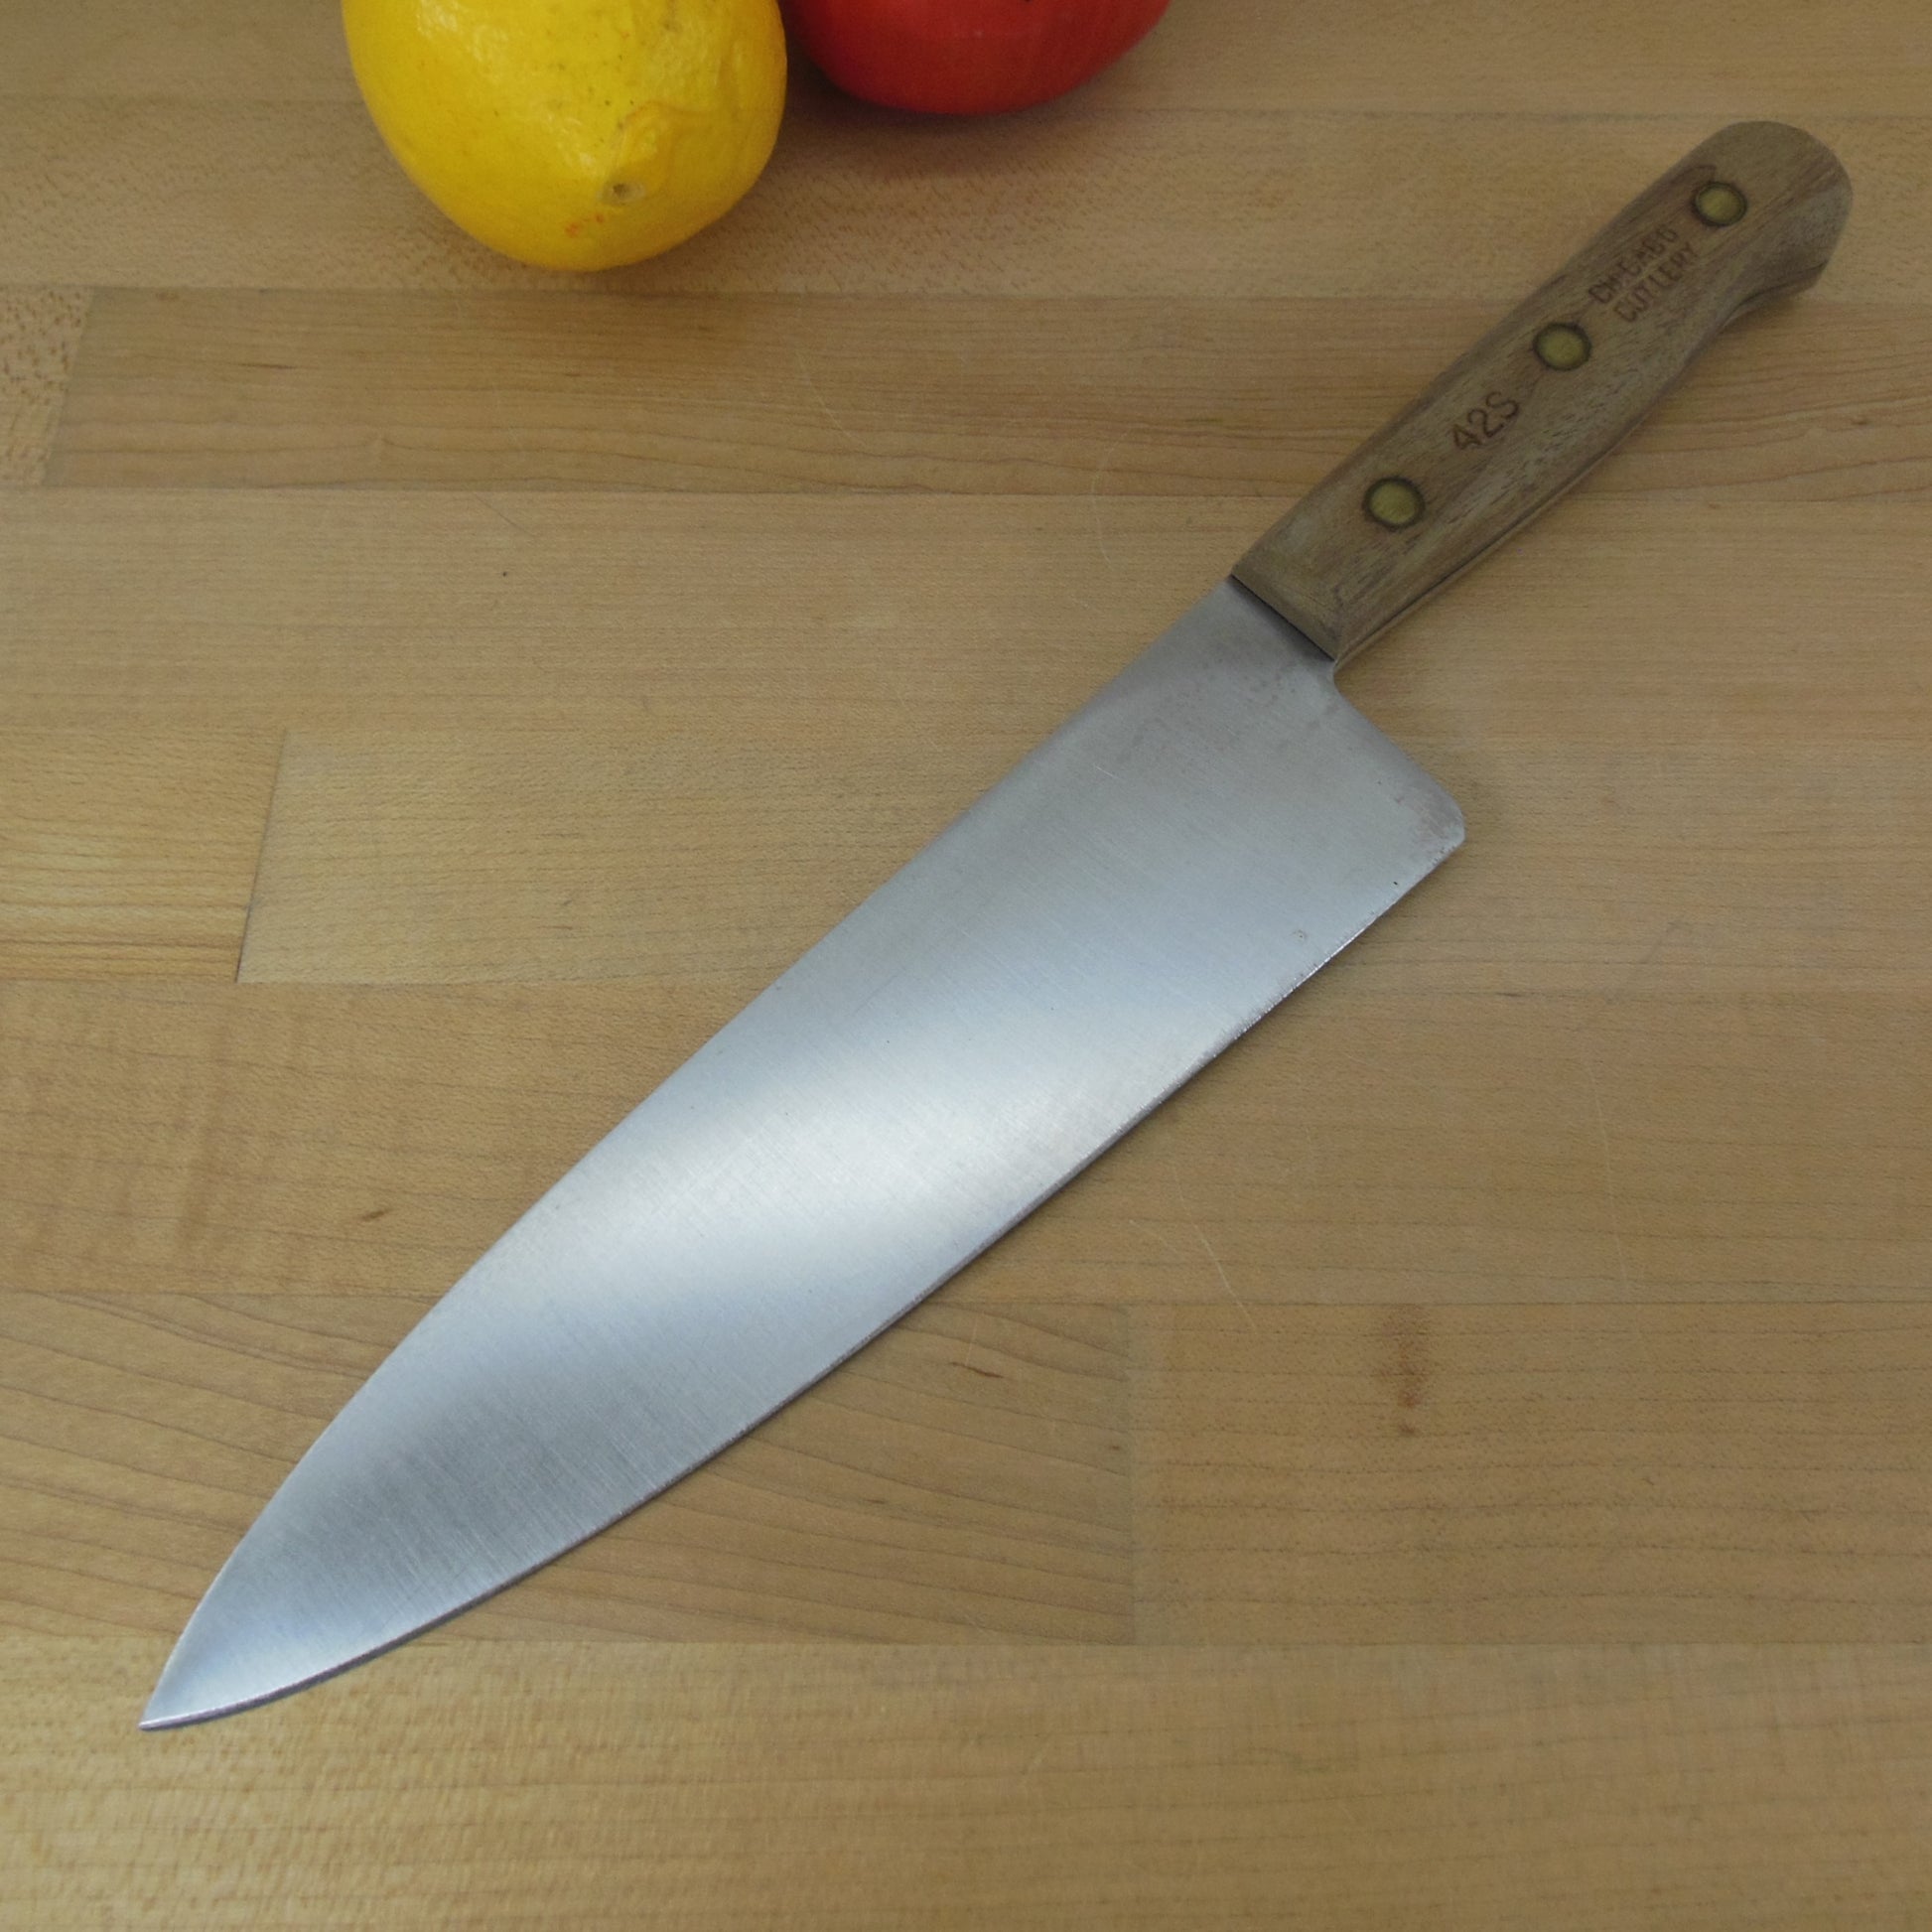 Chicago Cutlery USA 42S Chef 8 Knife - Walnut Handle Stainless Steel